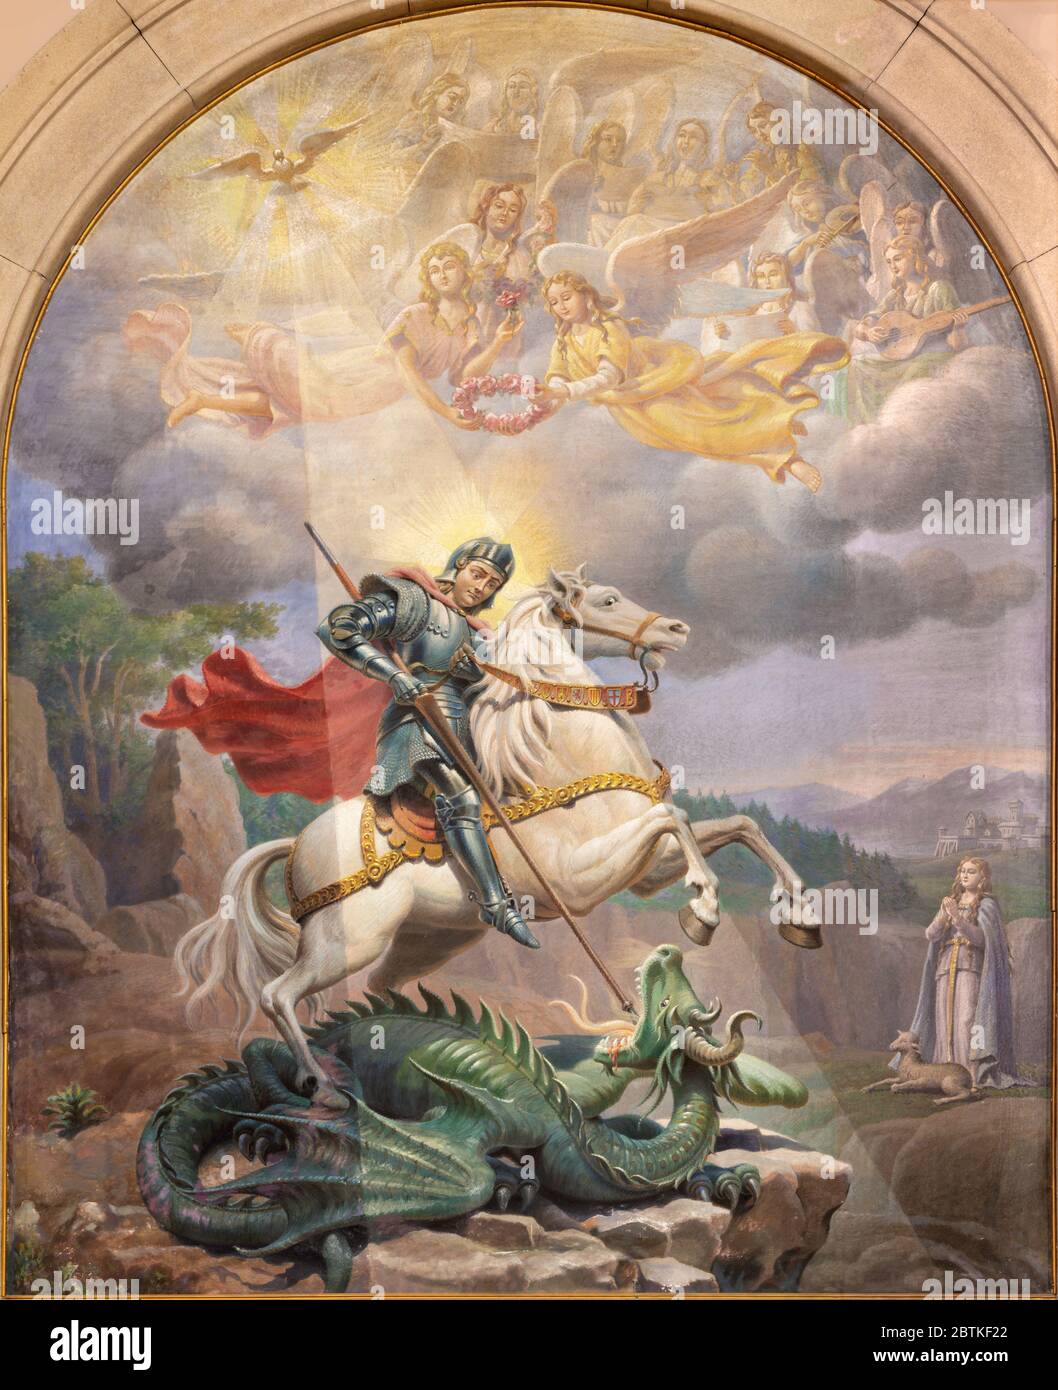 BARCELONA, SPAIN - MARCH 3, 2020: The painting of St. George in the church Iglesia del Perpetuo Socorro by Josep Mestres Cabanes (1958). Stock Photo